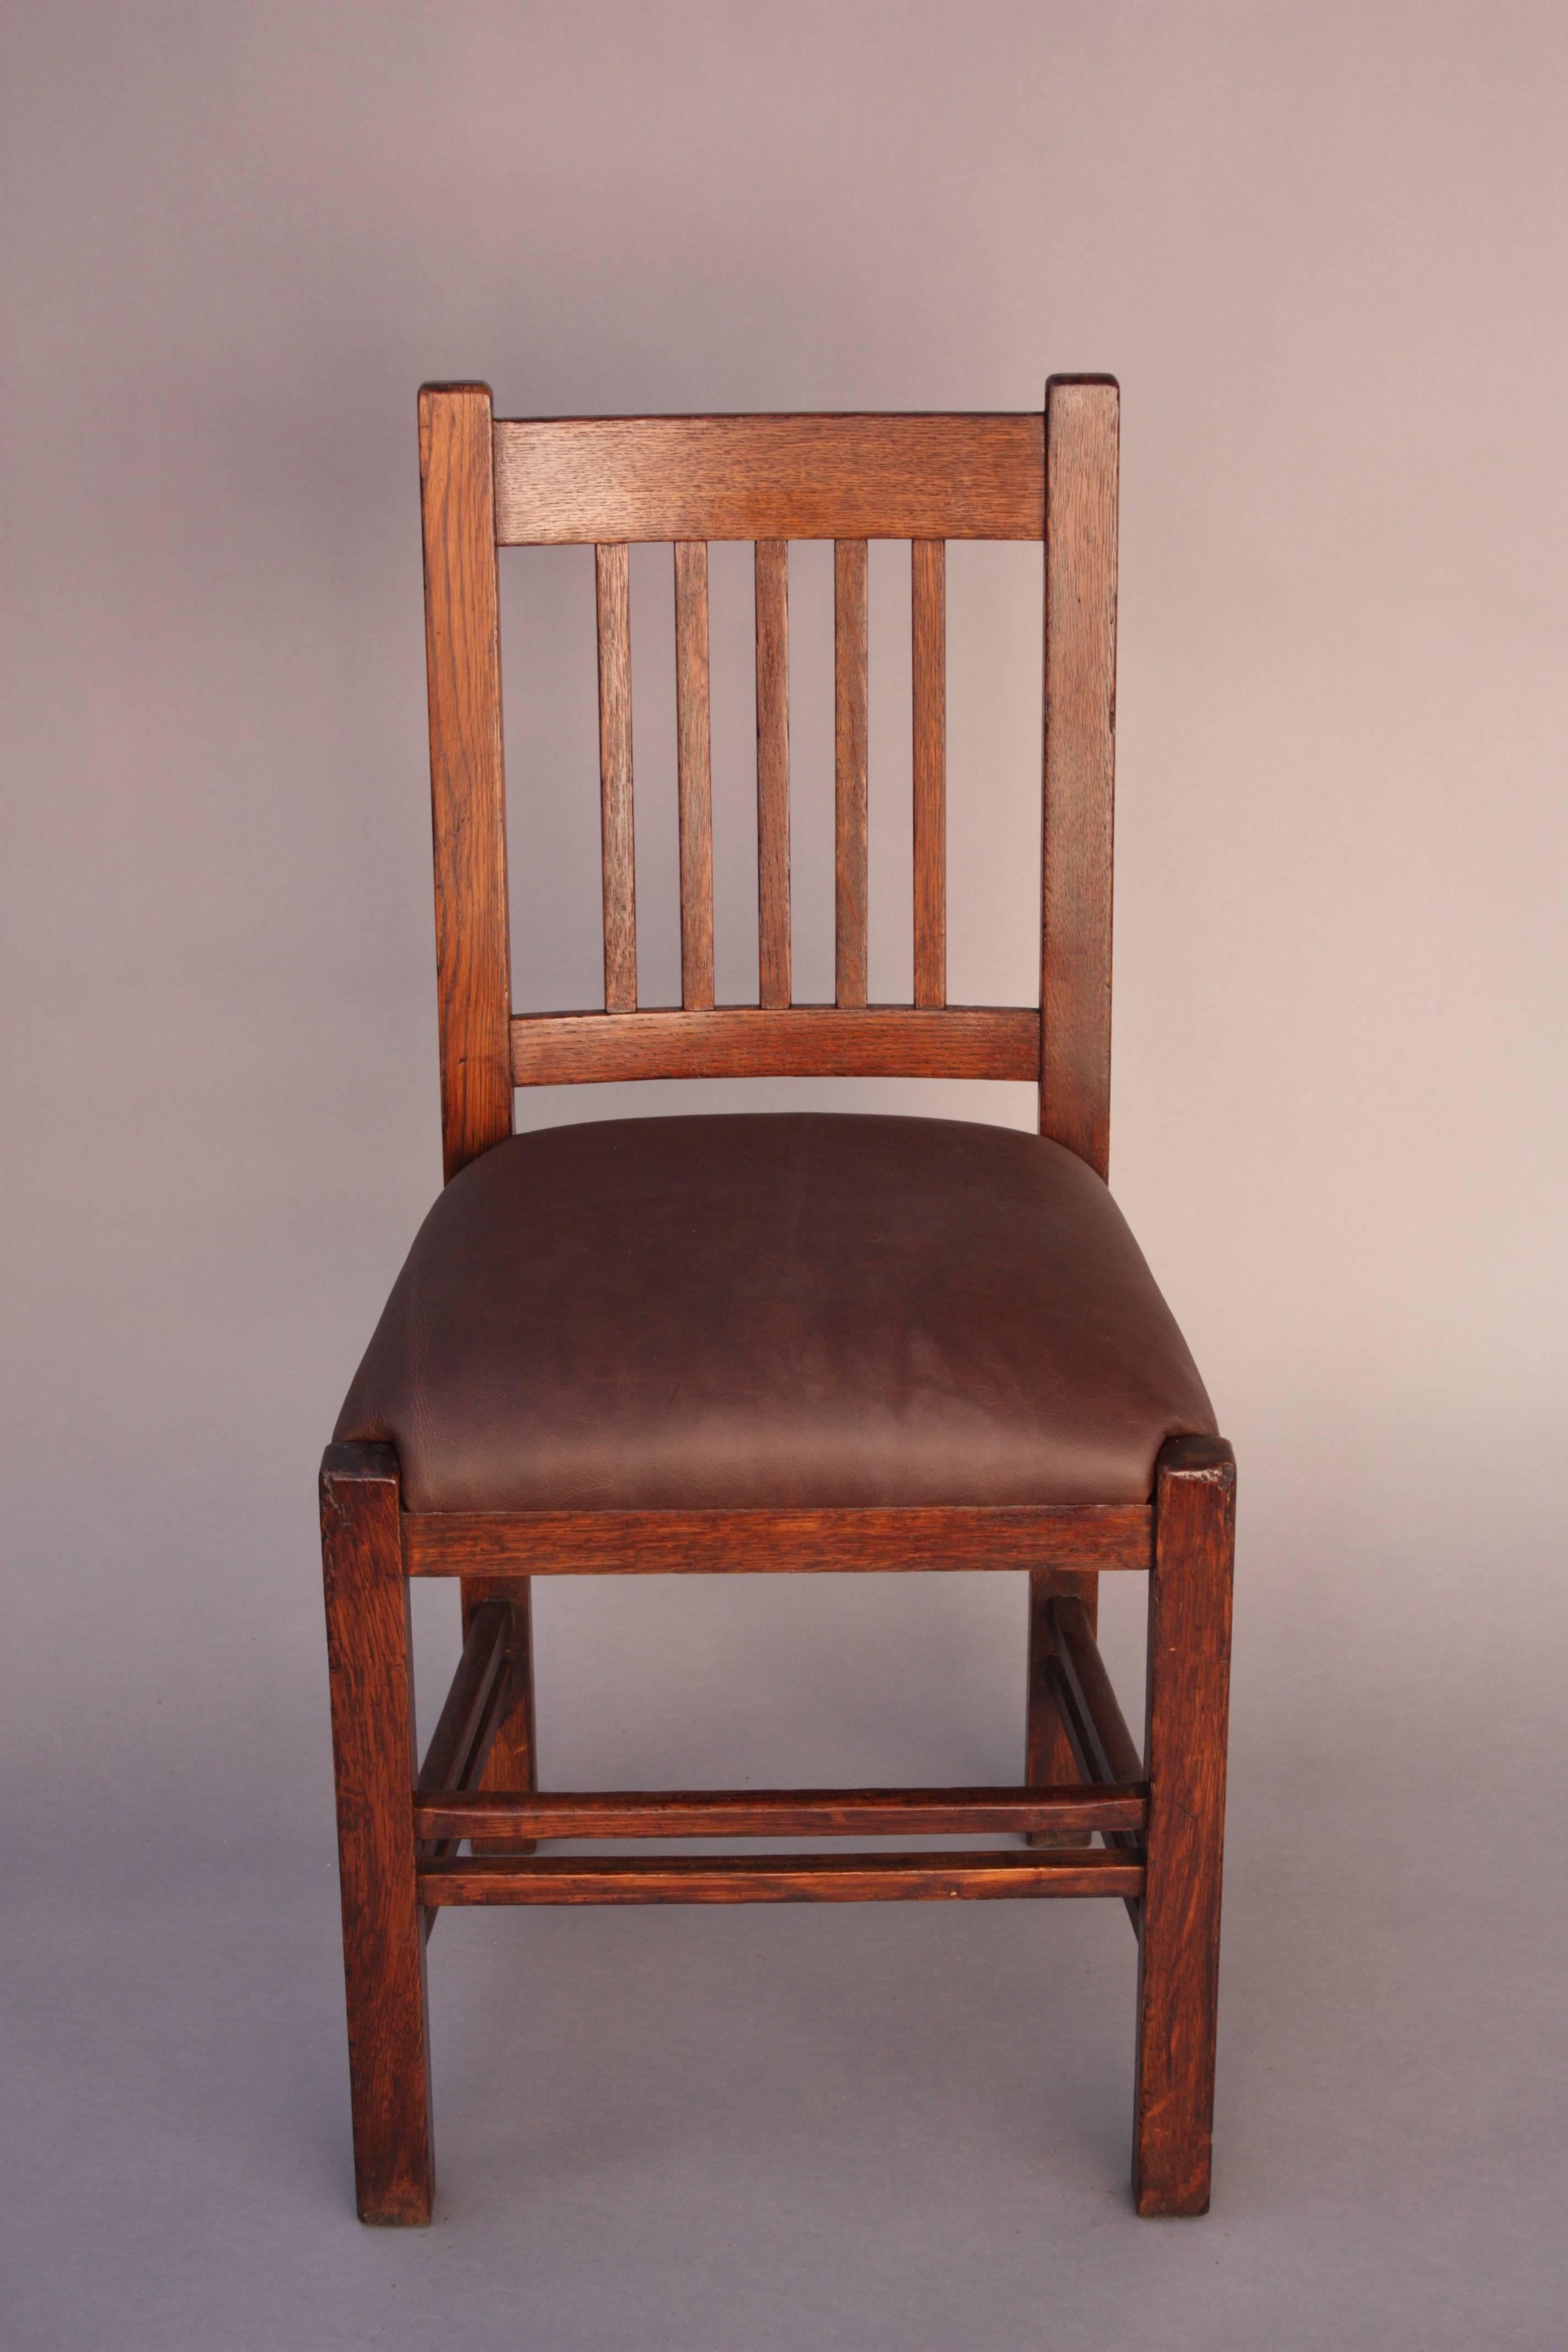 Circa 1910 side chair with Prairie Style spindles. New leather upholstery.